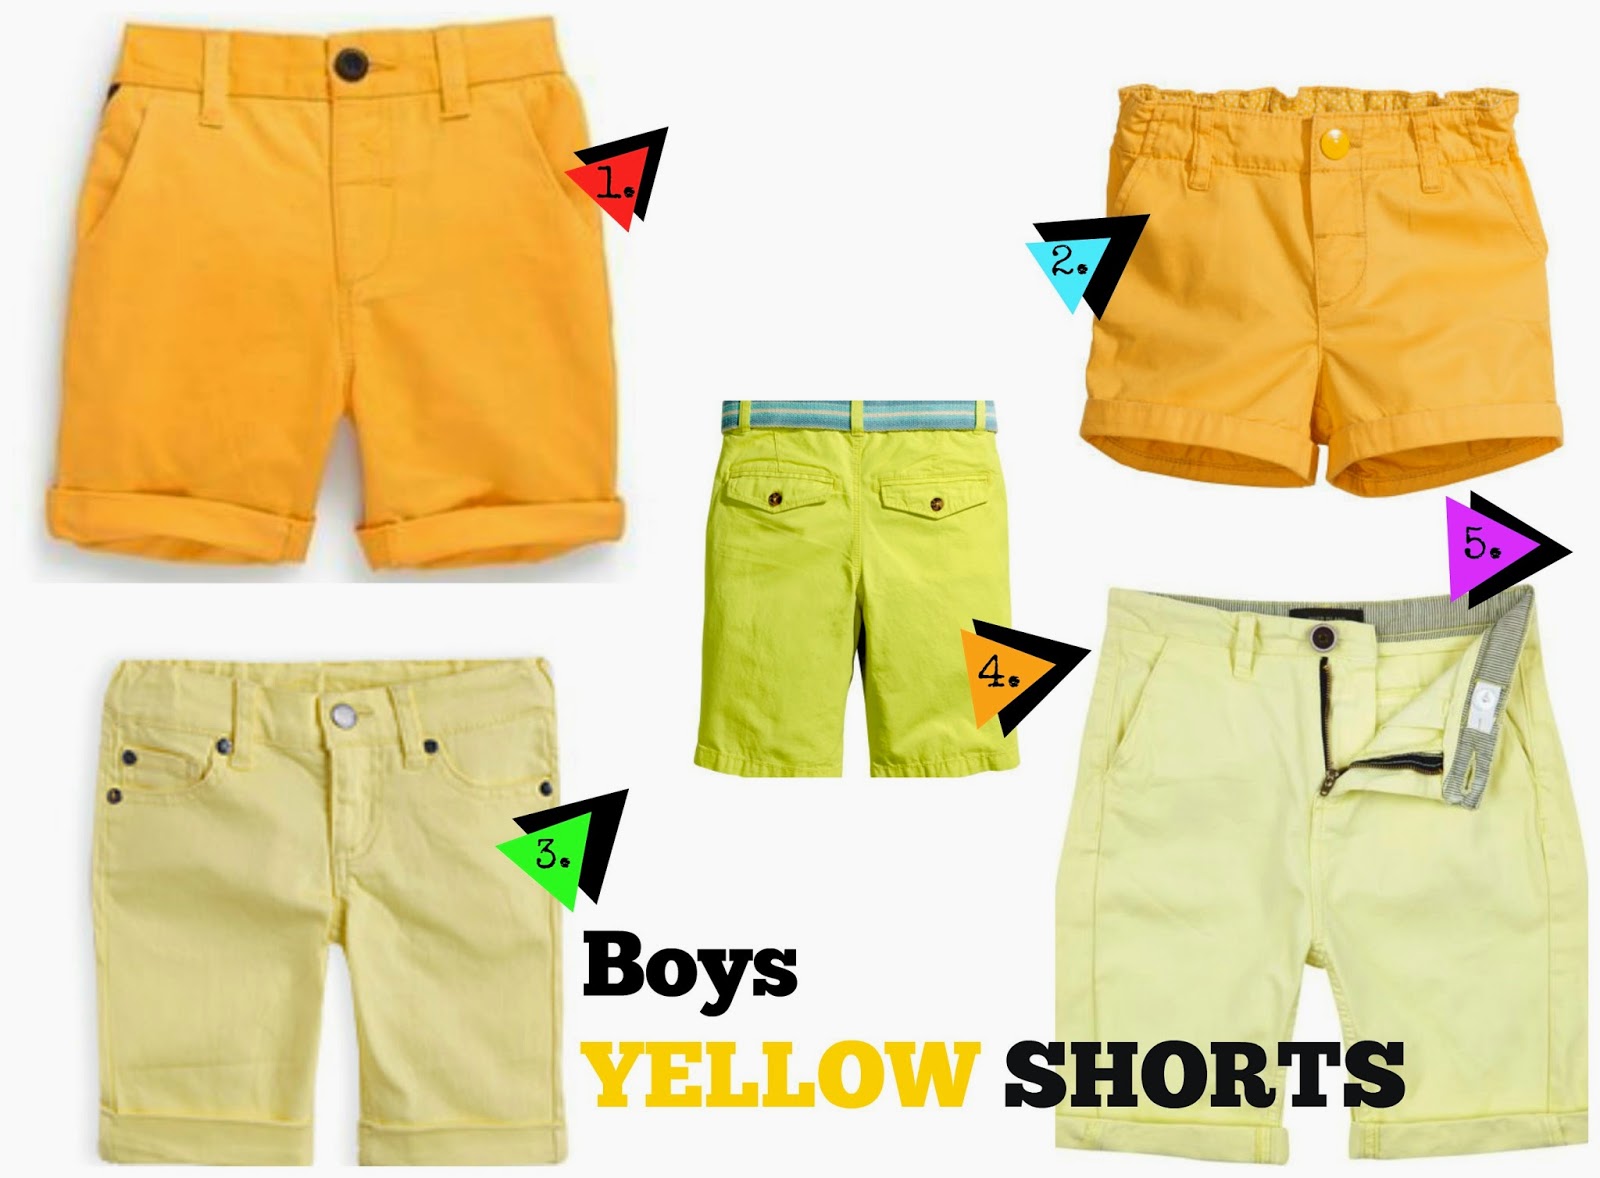 Boys Yellow Shorts | Little Likely Lads